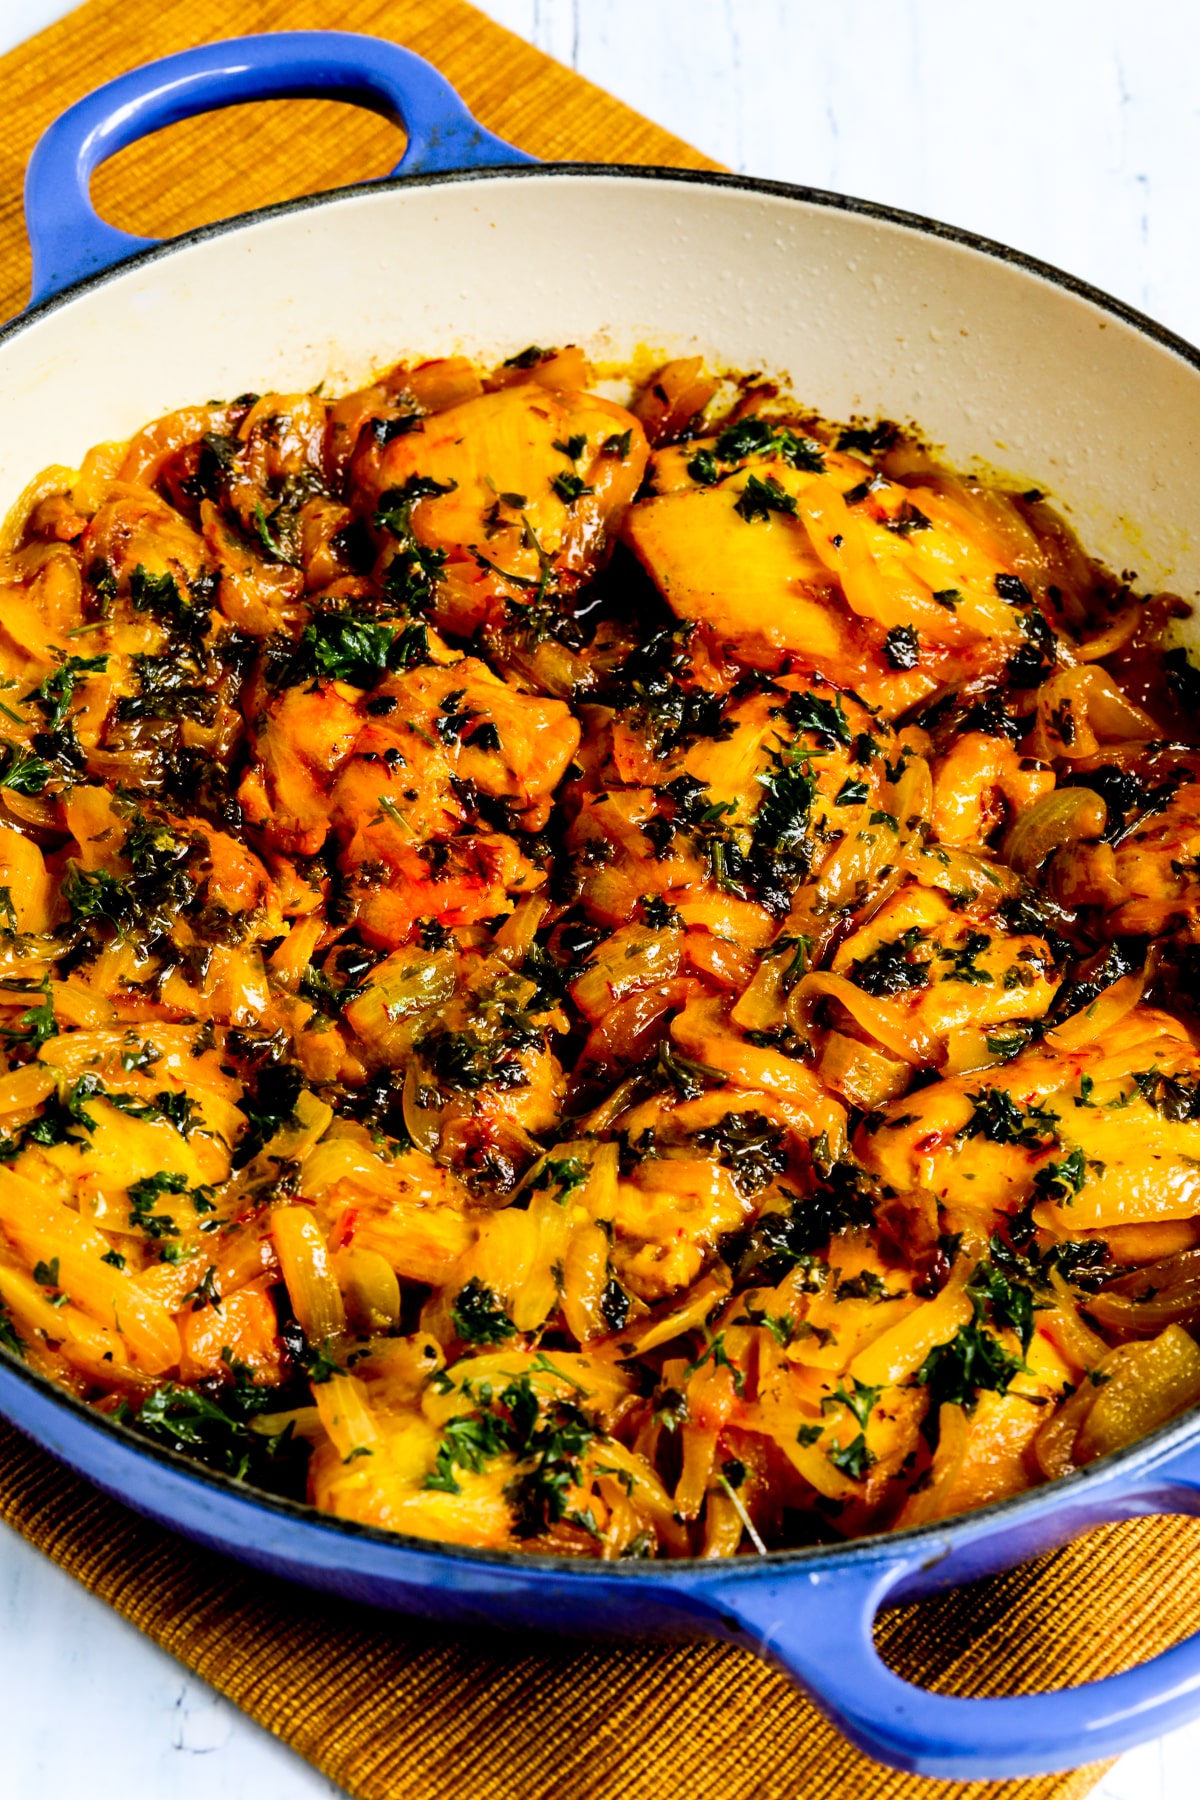 Saffron Chicken with Parsley and Lemon shown in pan it was cooked in.